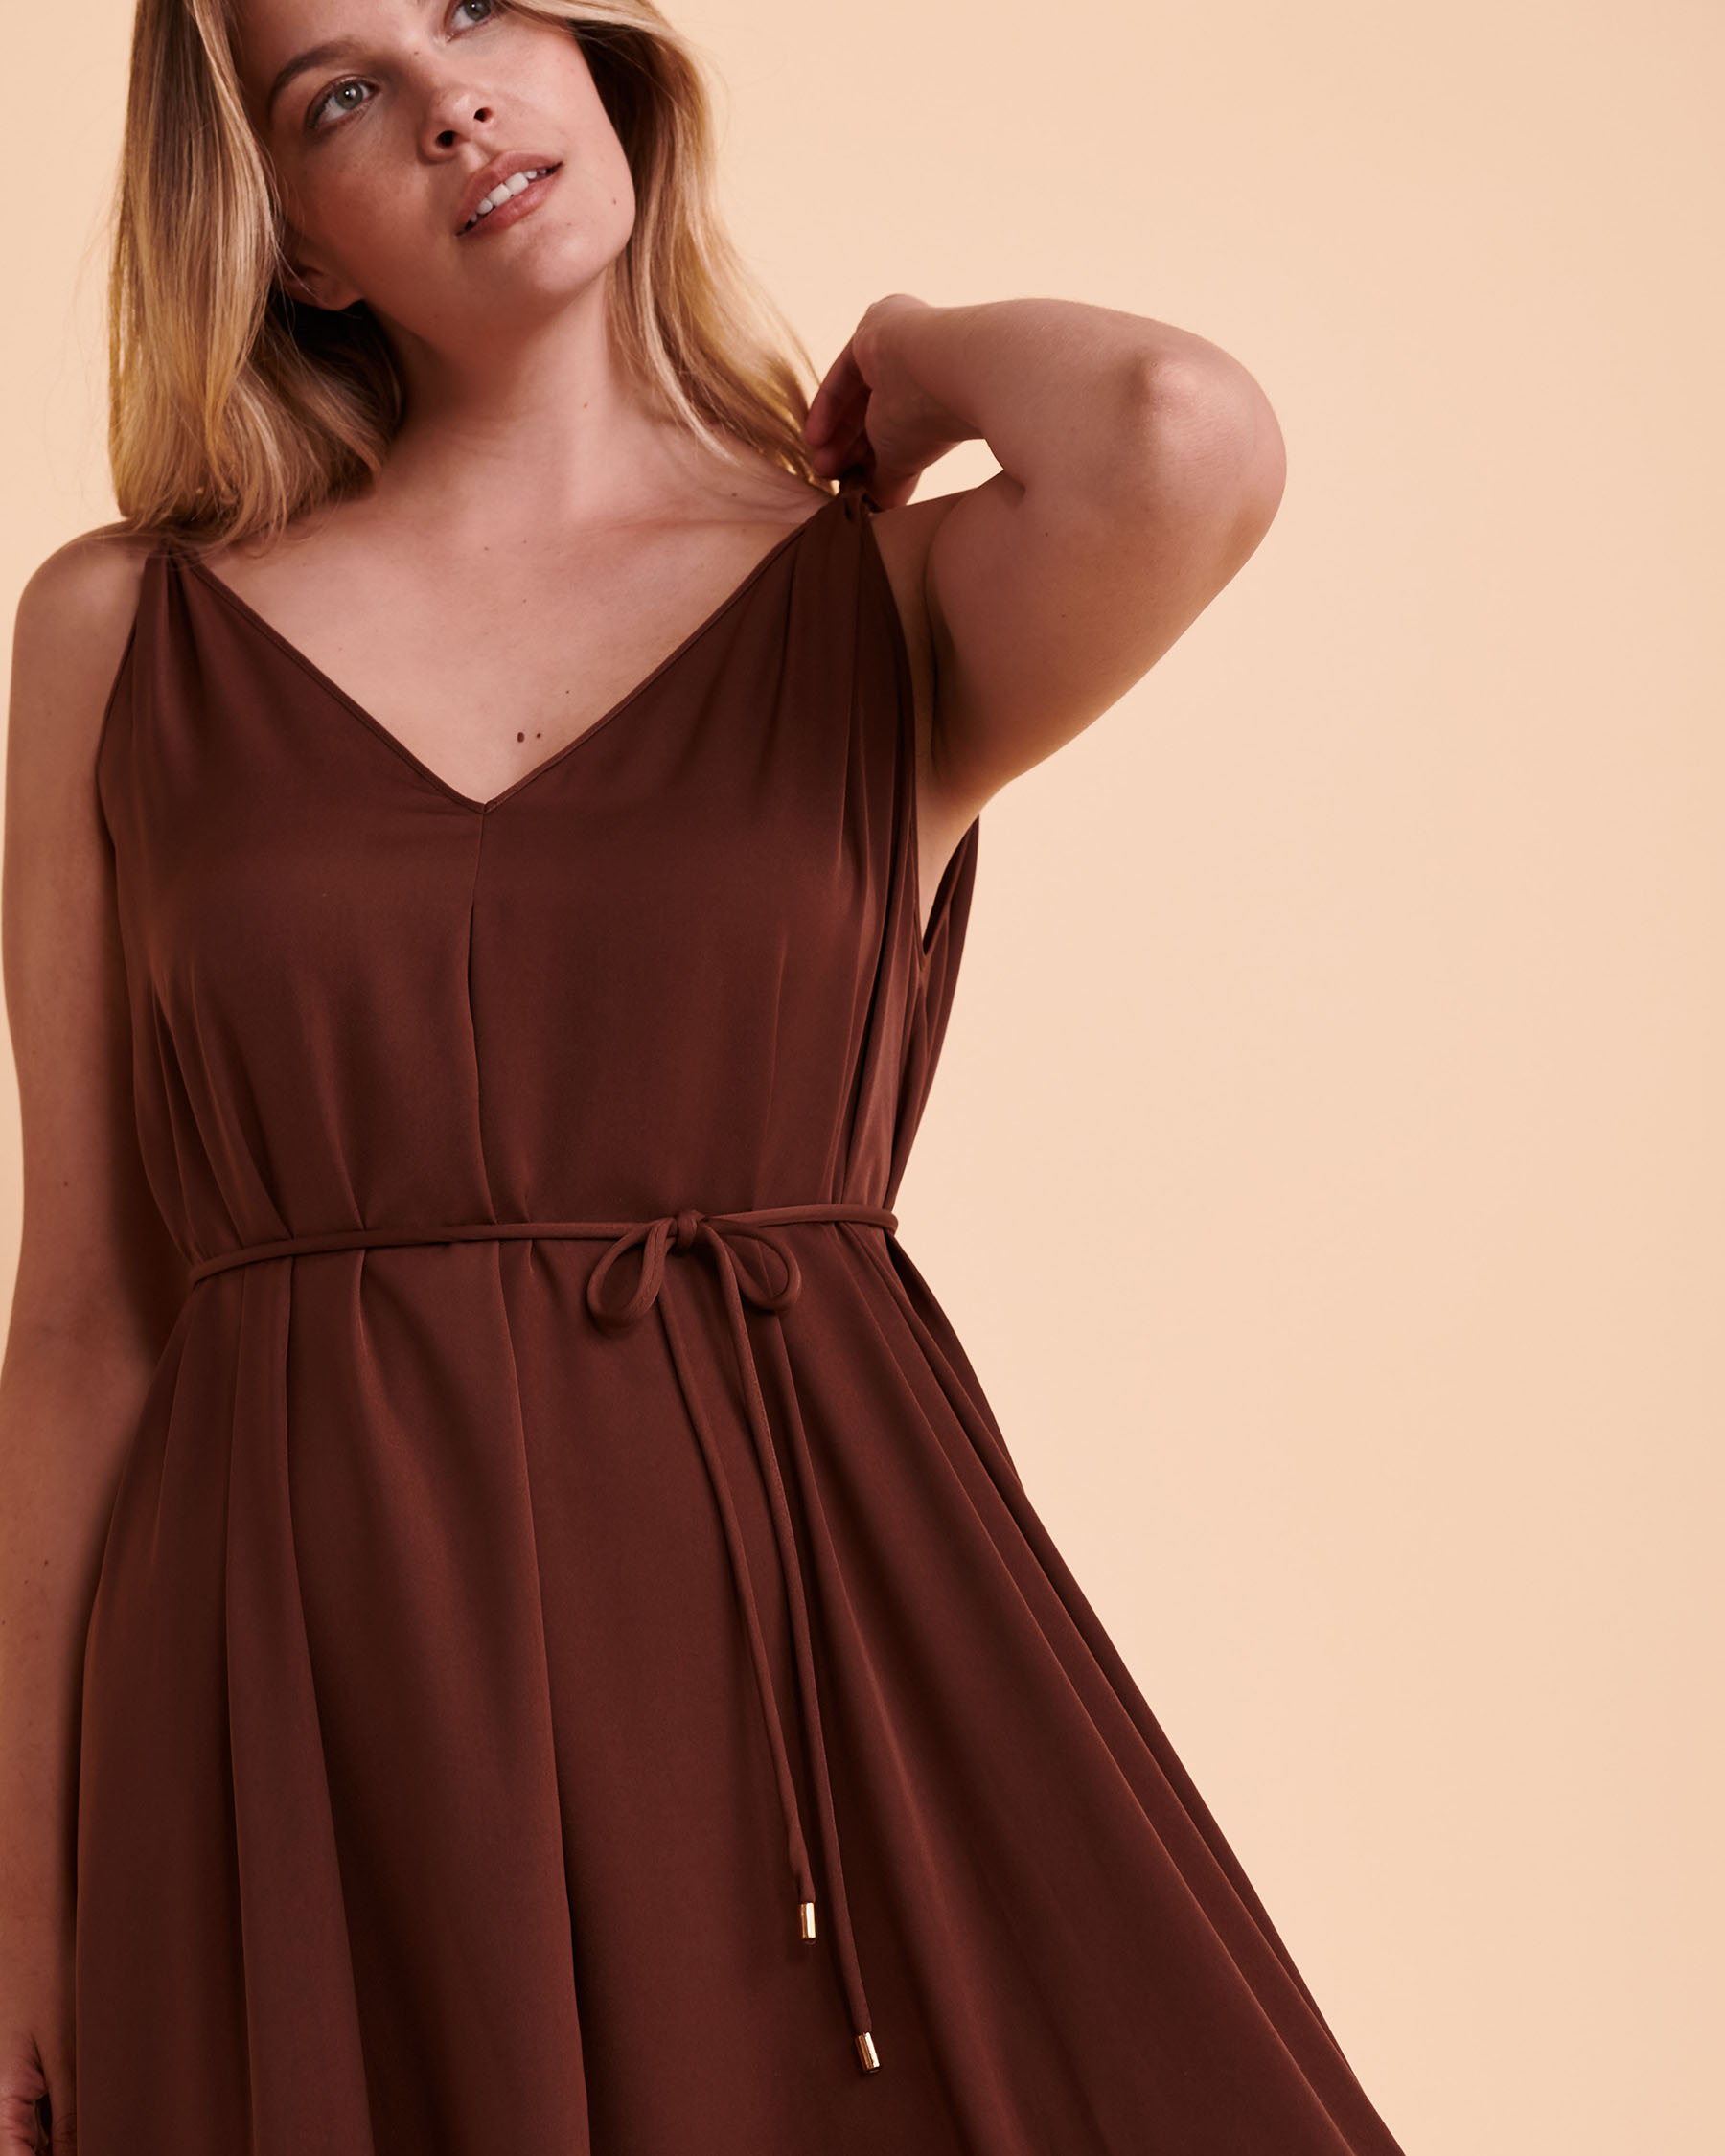 SANTEMARE Open Back Maxi Dress Brown 02300065 - View4